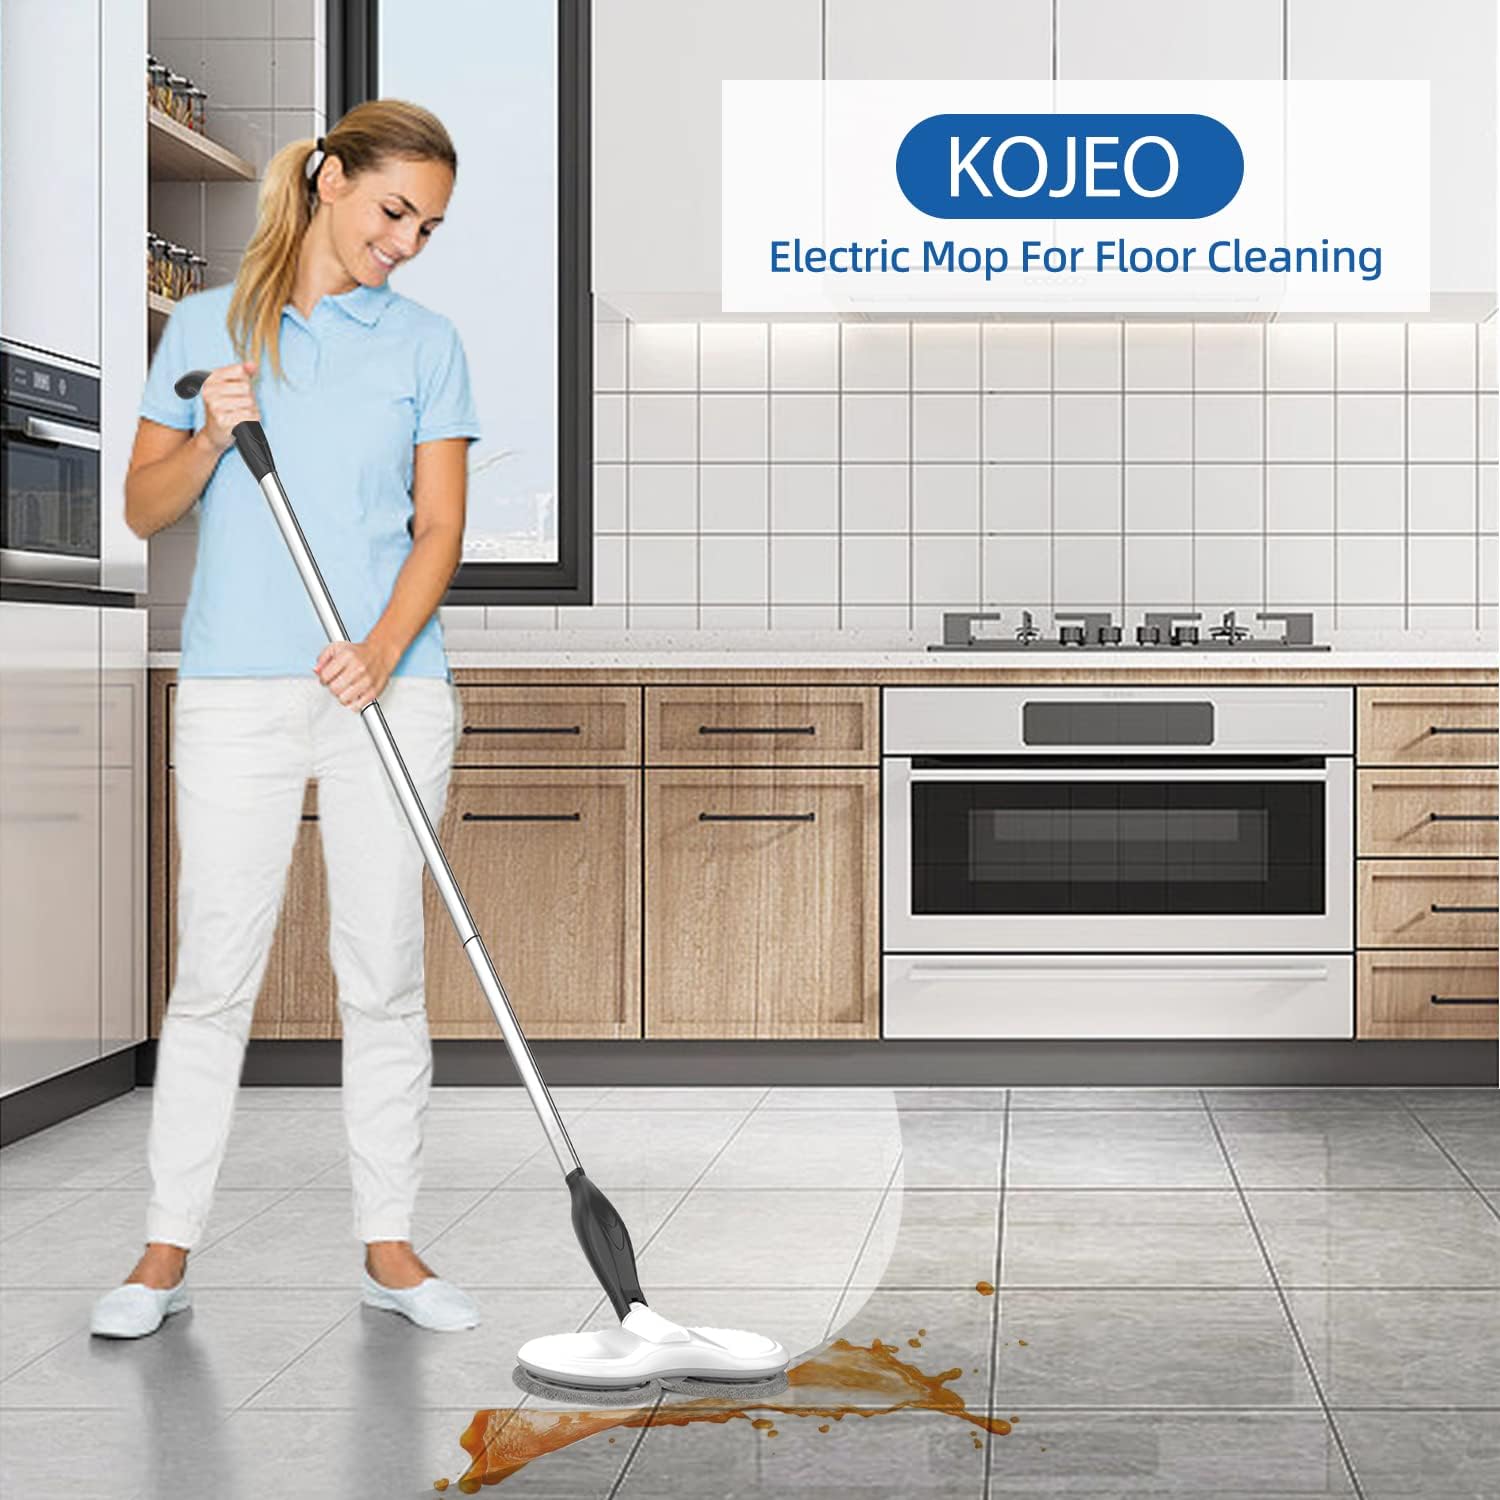 VENETIO PowerScrub Electric Mop for Floor Cleaning, As Seen On TV, Cordless Spin Mopper Motorised Mops for Hardwood Tile Laminate Floor Daily Light Cleaning, Six PCS Replacement Mop Pads ➡ CS-00033